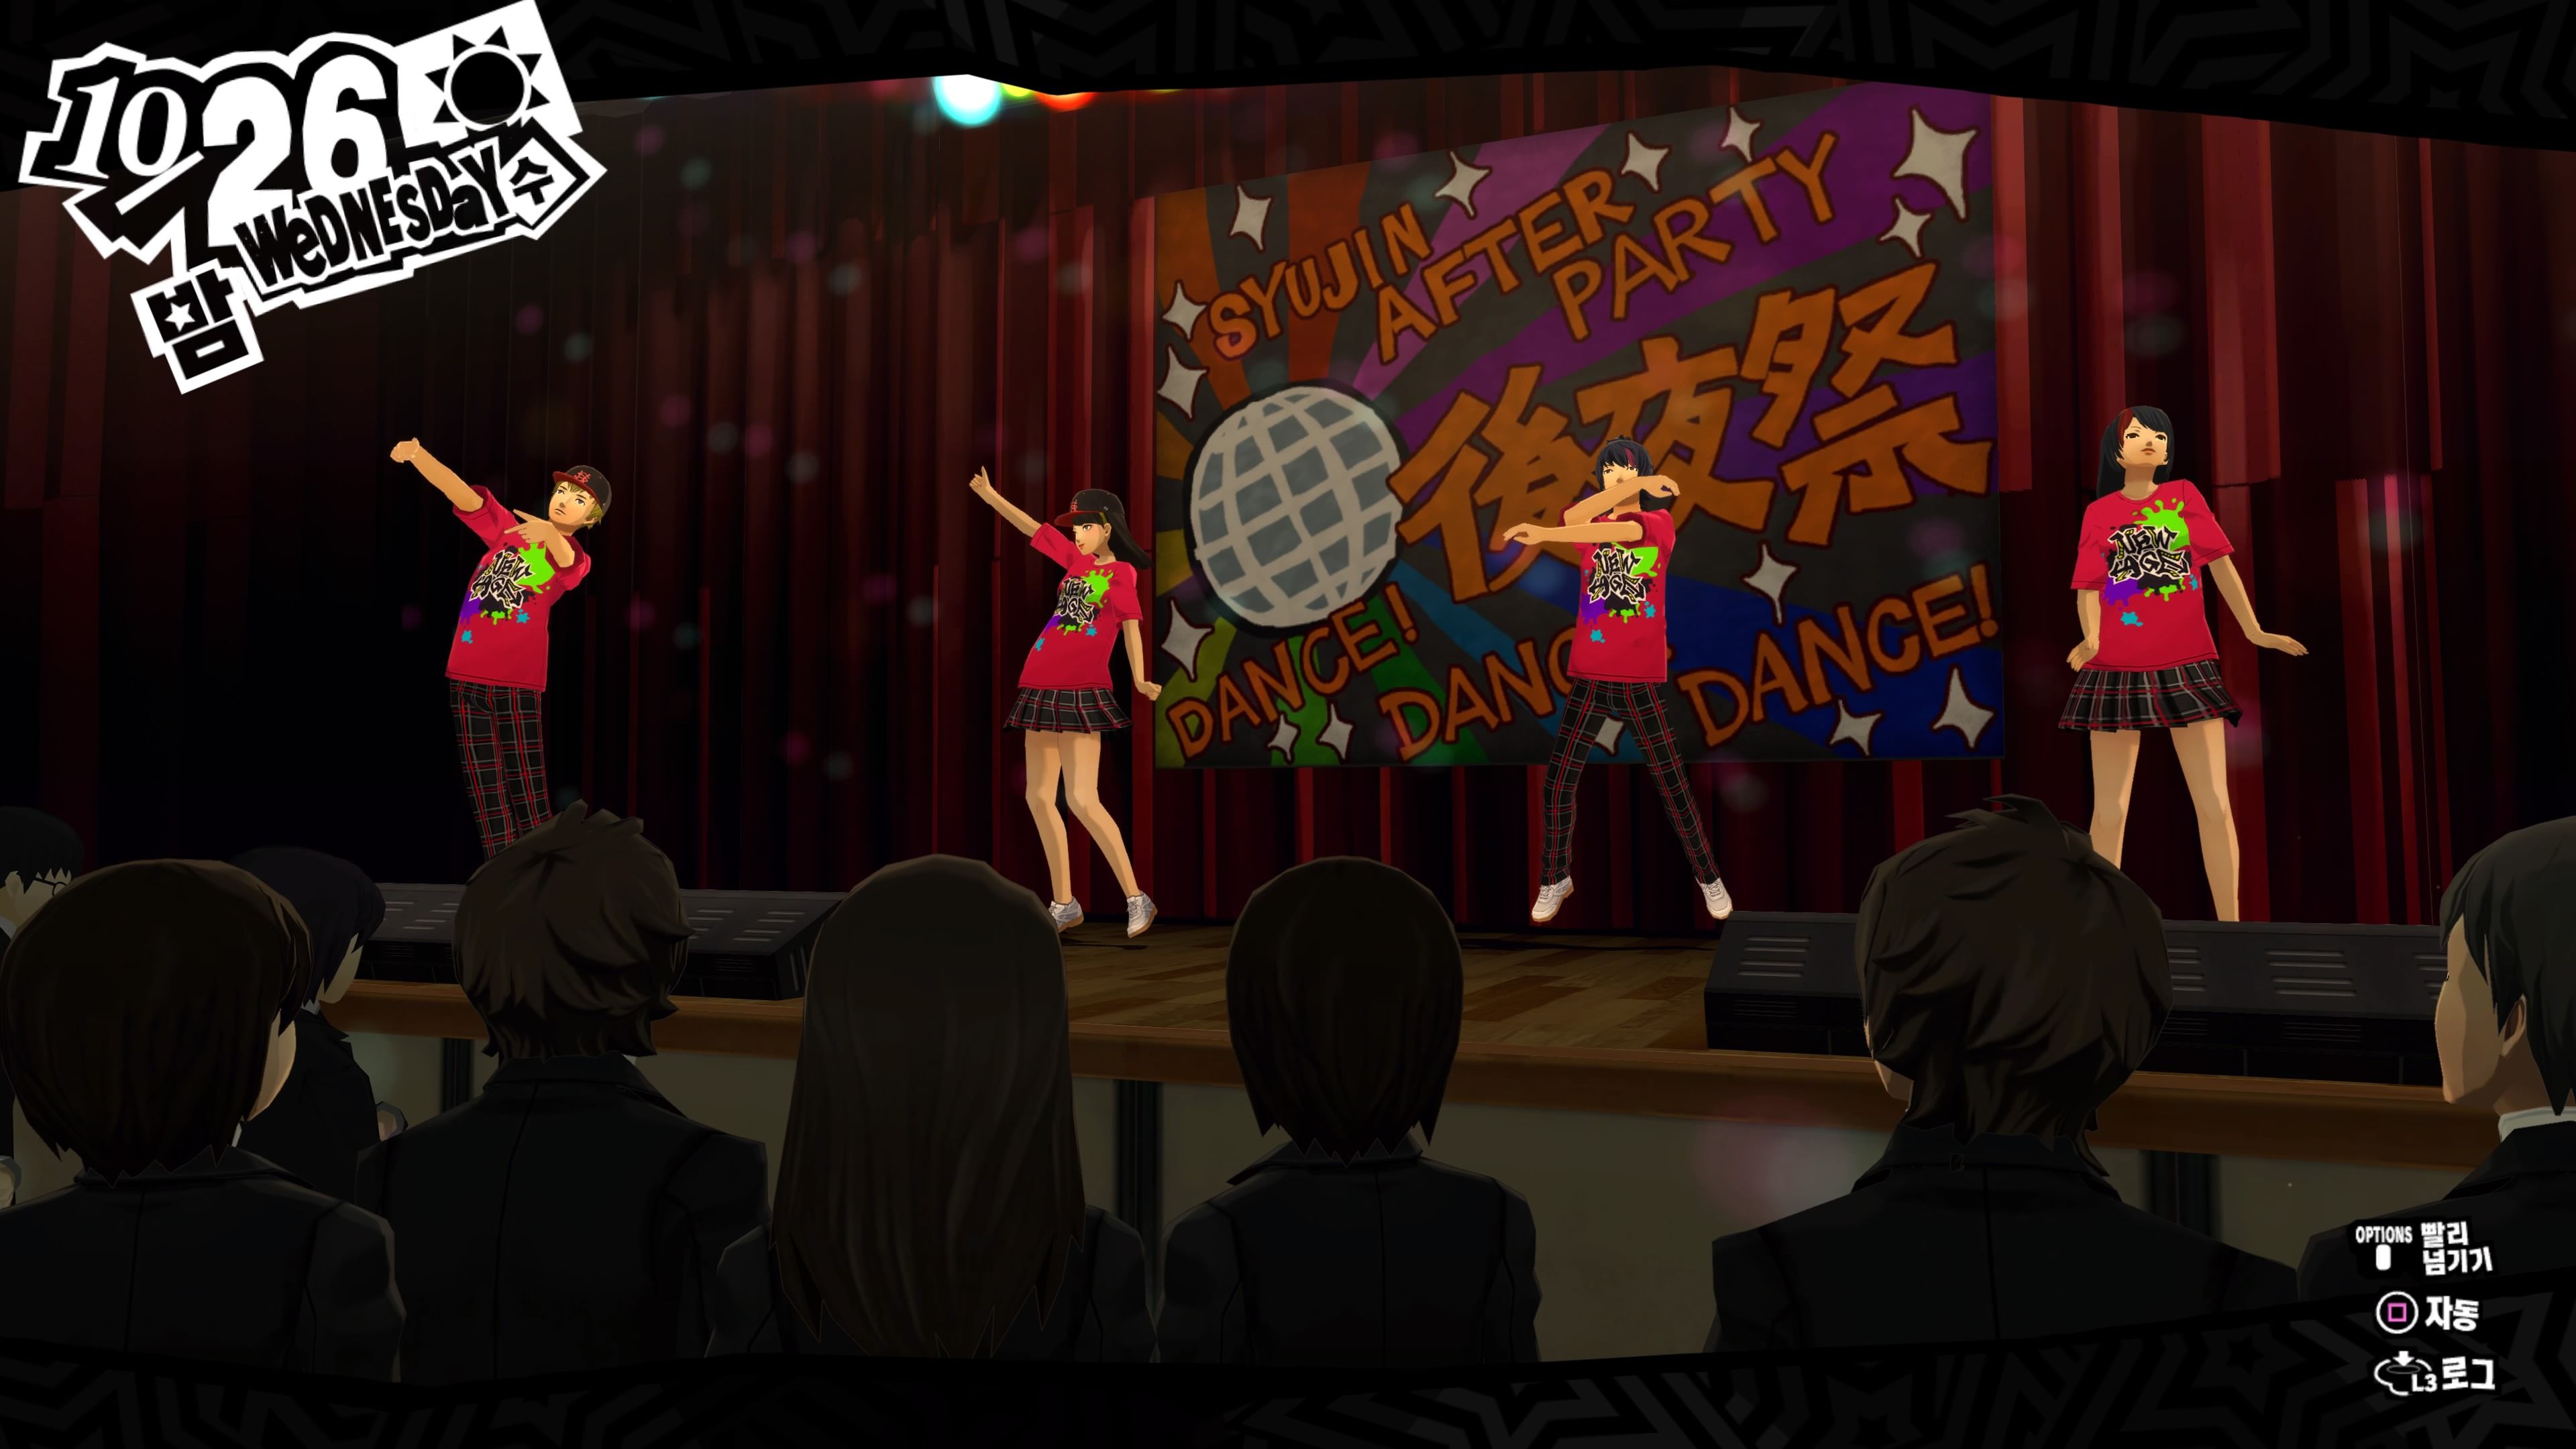 The dance festival in Persona 5 Royal